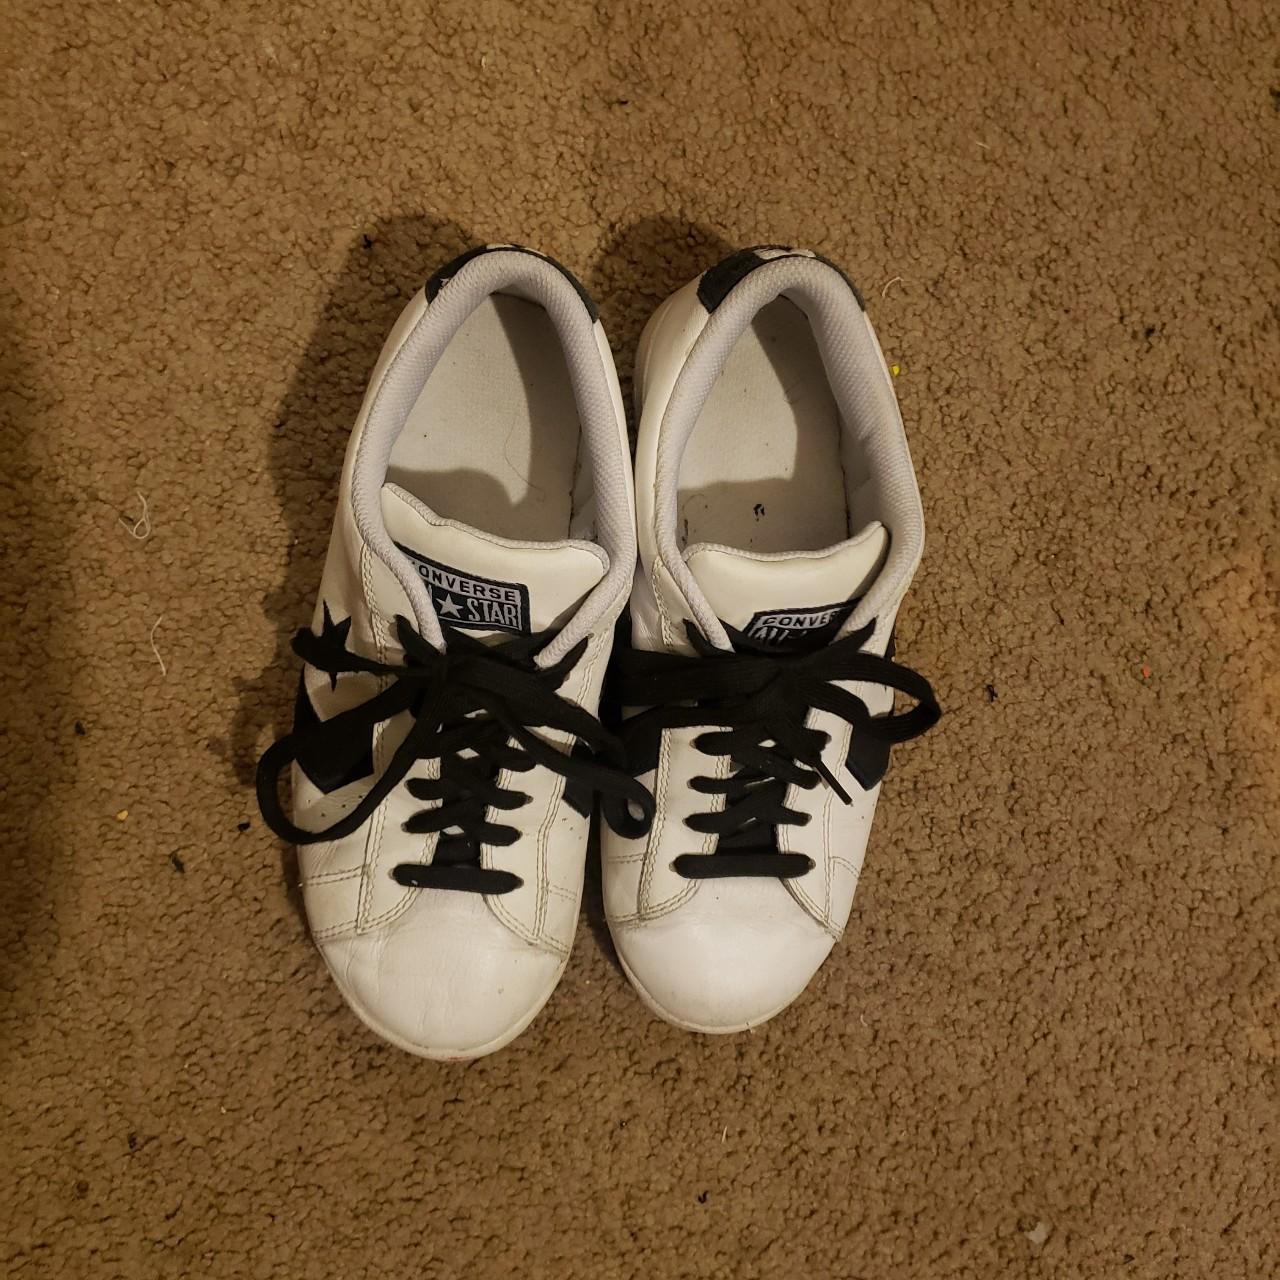 Converse Men's White and Black Trainers (3)